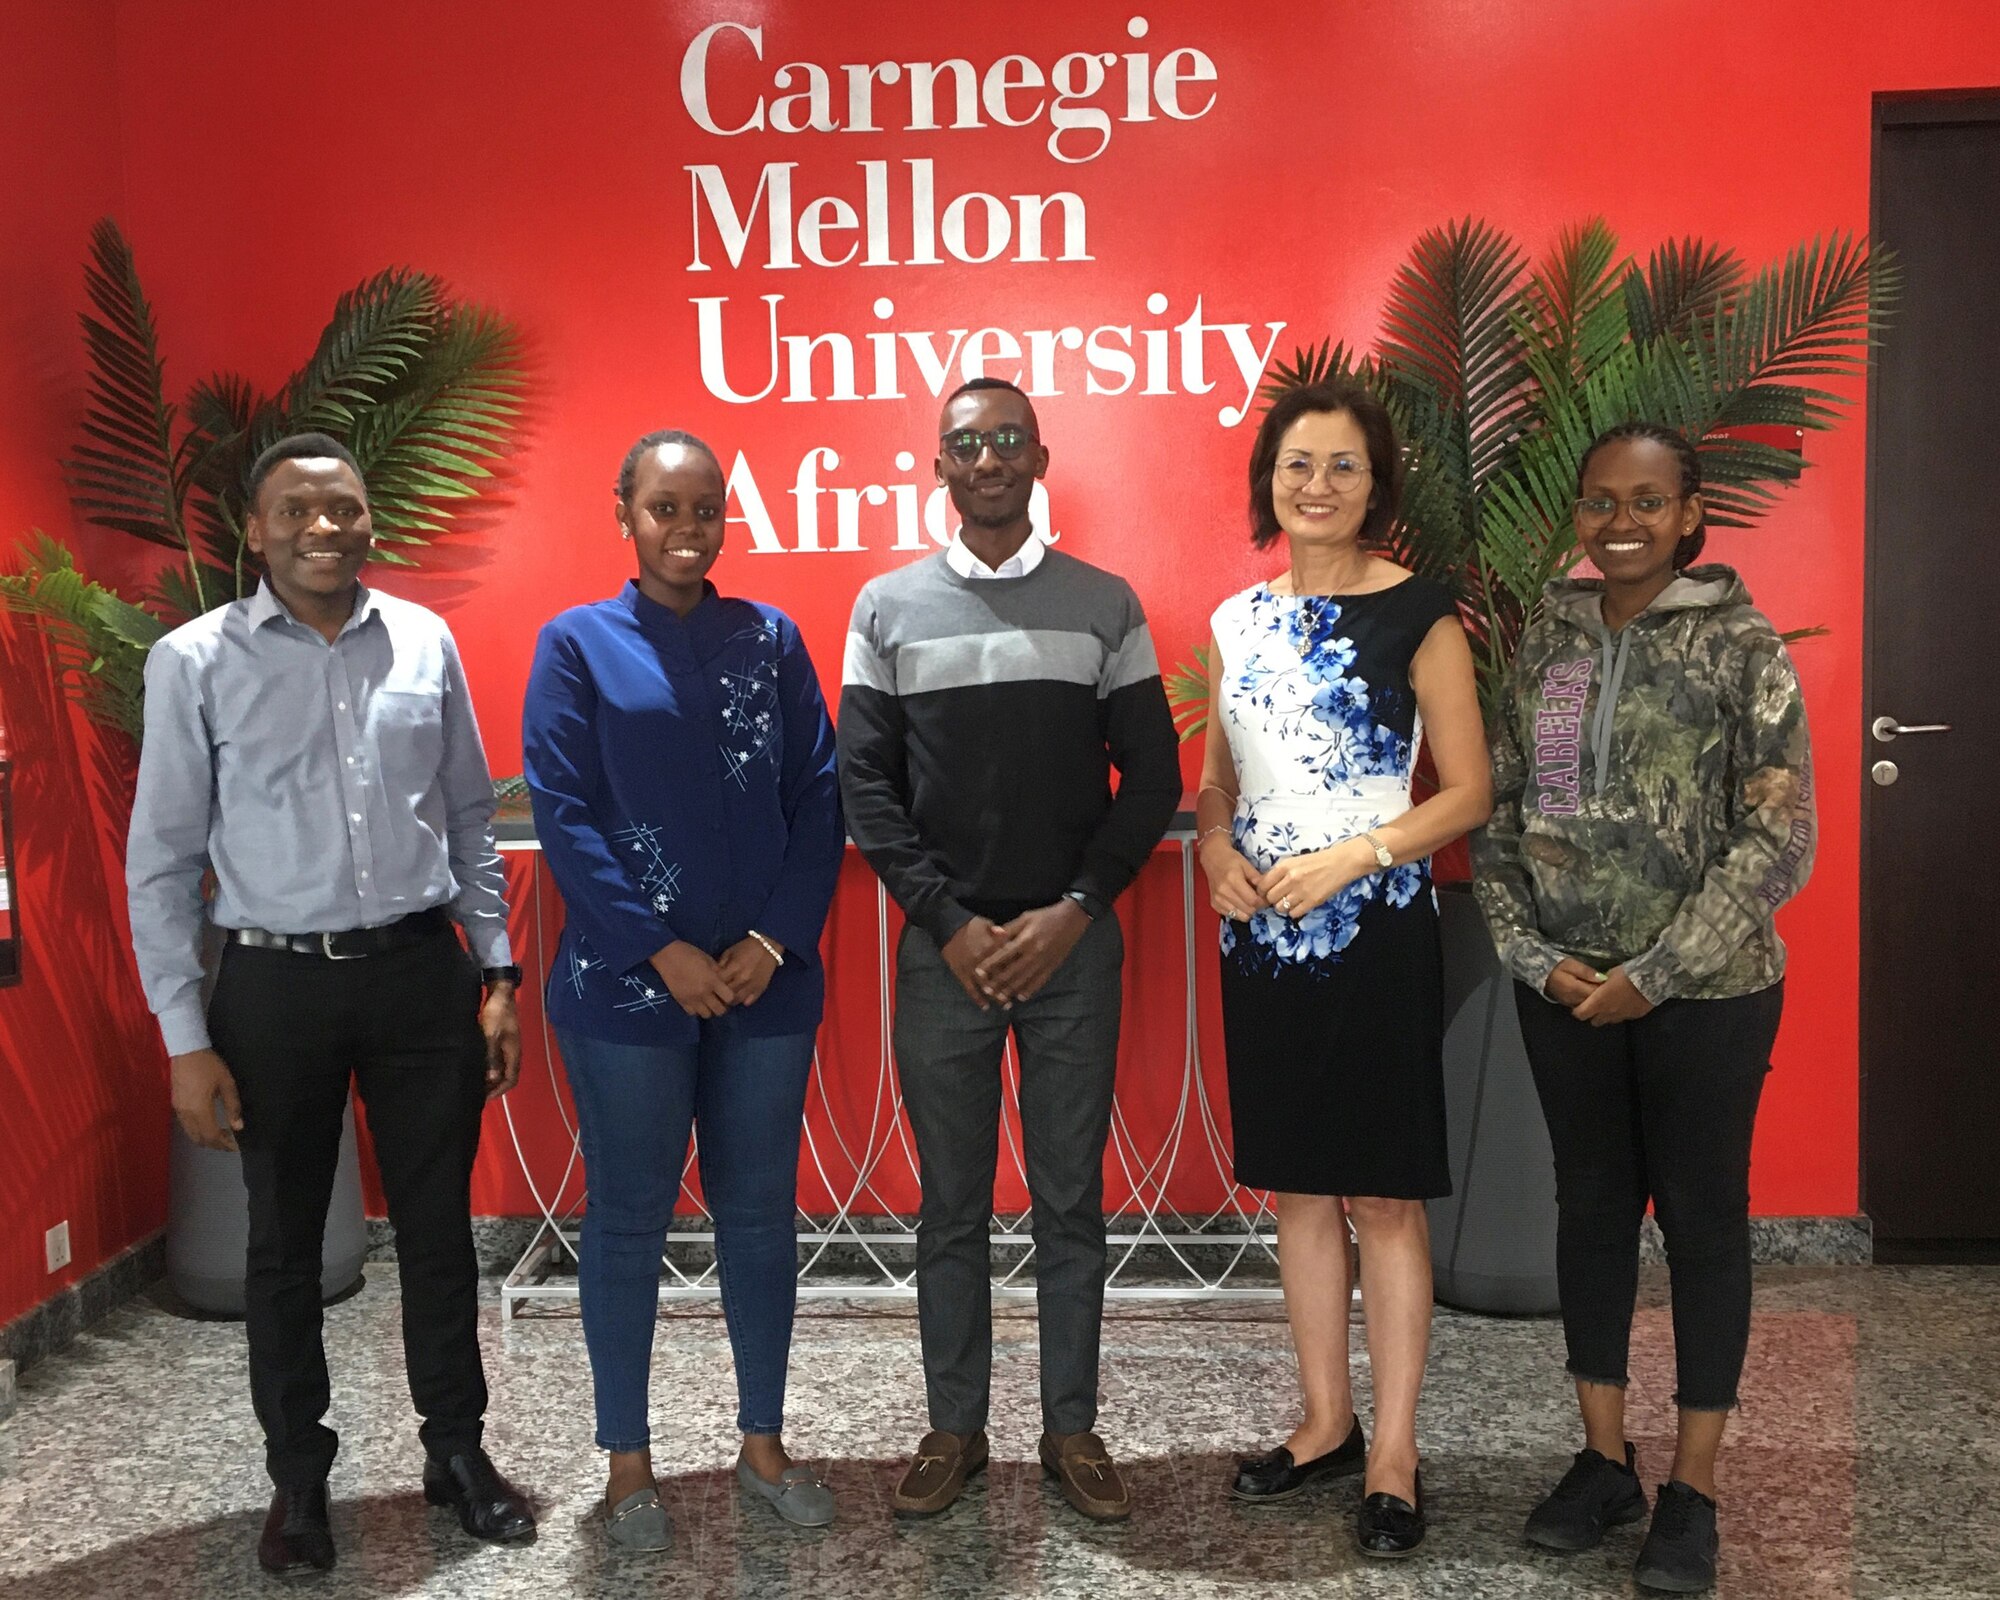 Air Force Institute of Technology professor Dr. Aihua Wood traveled to Kigali, Rwanda in September to explore collaboration opportunities with Carnegie Mellon University-Africa. While there, she met with representatives from the school’s Student Guild